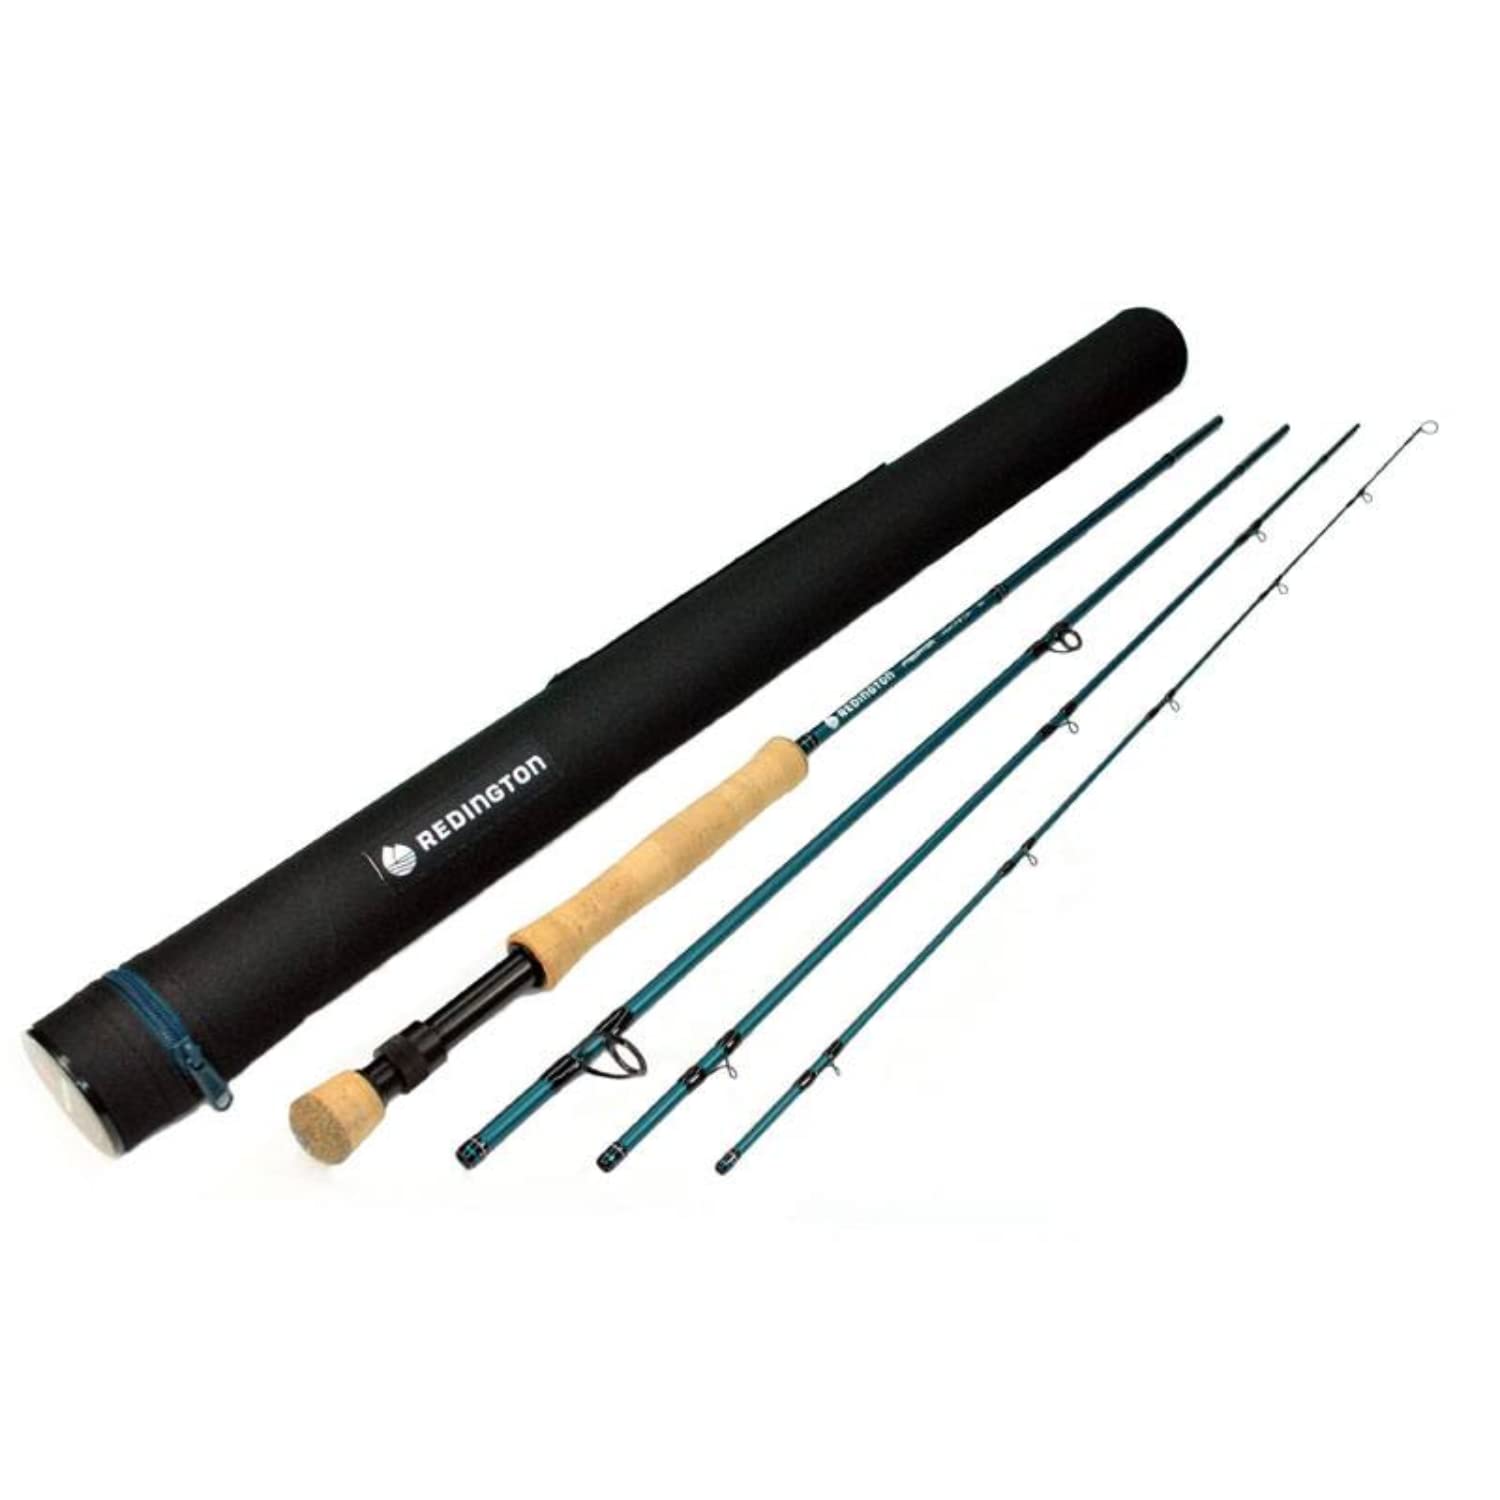 Redington Predator Fly Fishing Rod with Tube, 4 Pieces, Big Game Fish Rod,  Freshwater and Saltwater 5 WT 9